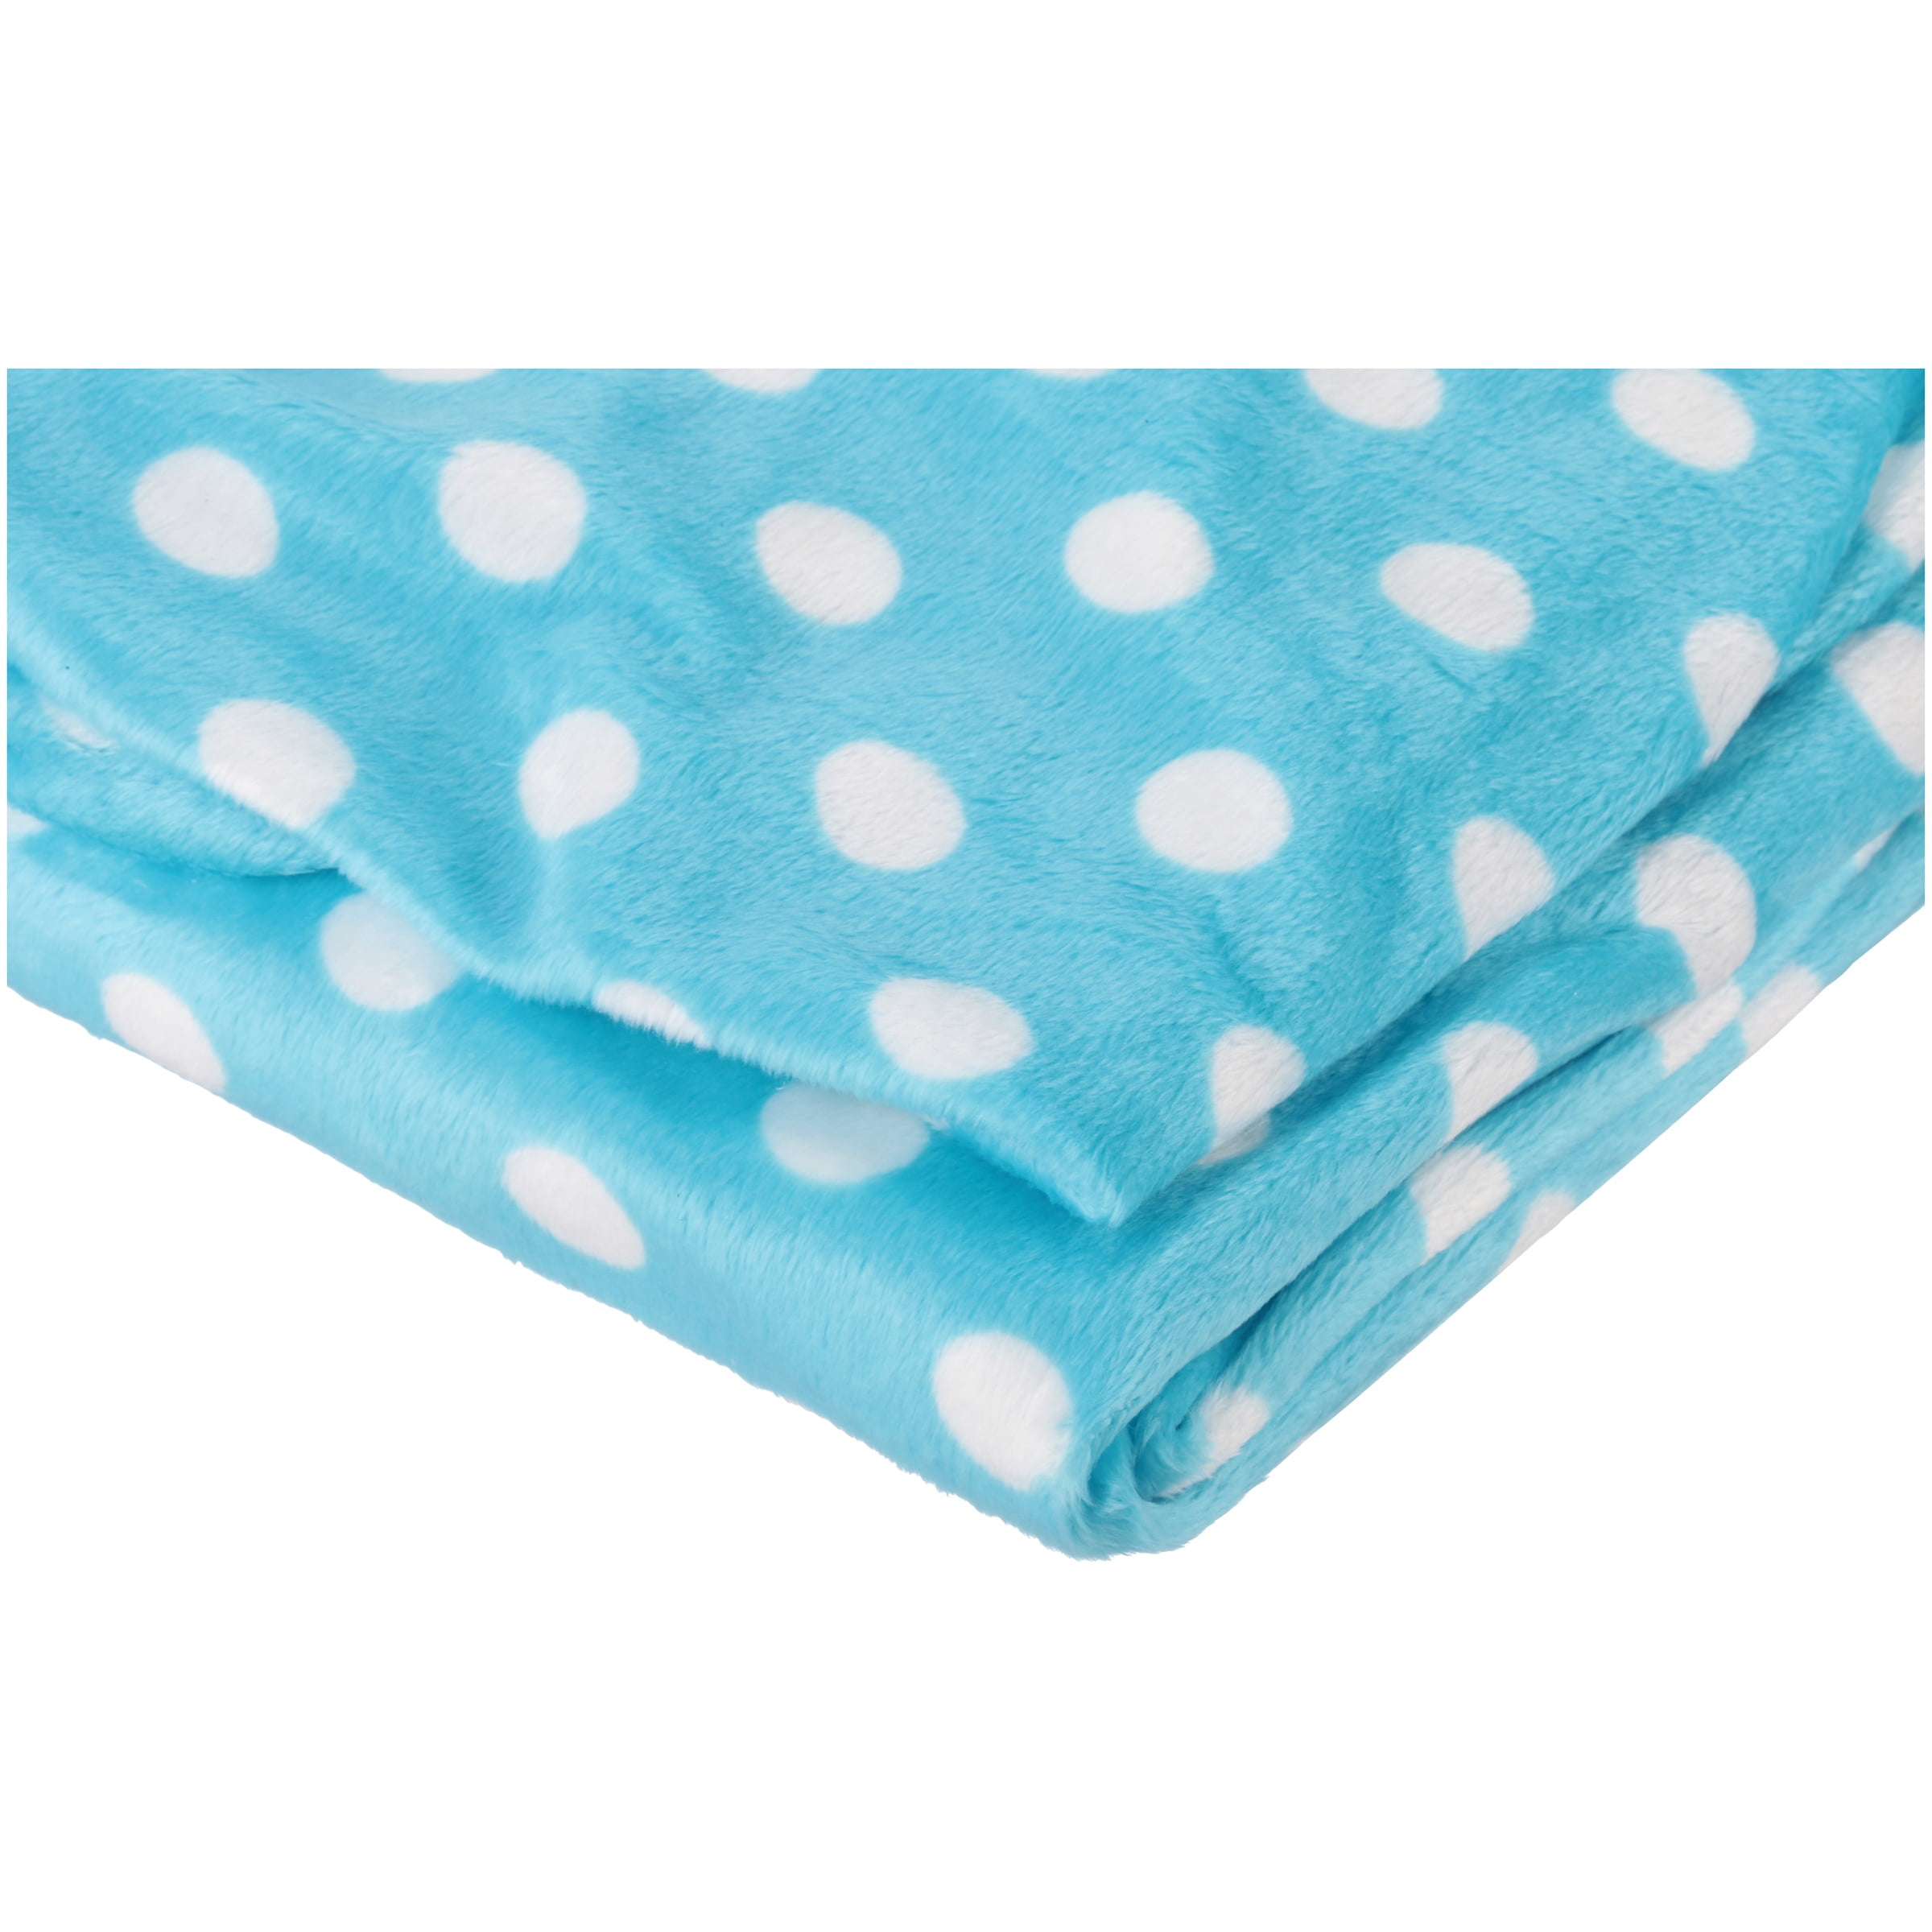 Summer Infant Ultra Plush Changing Pad Cover Teal Medallion